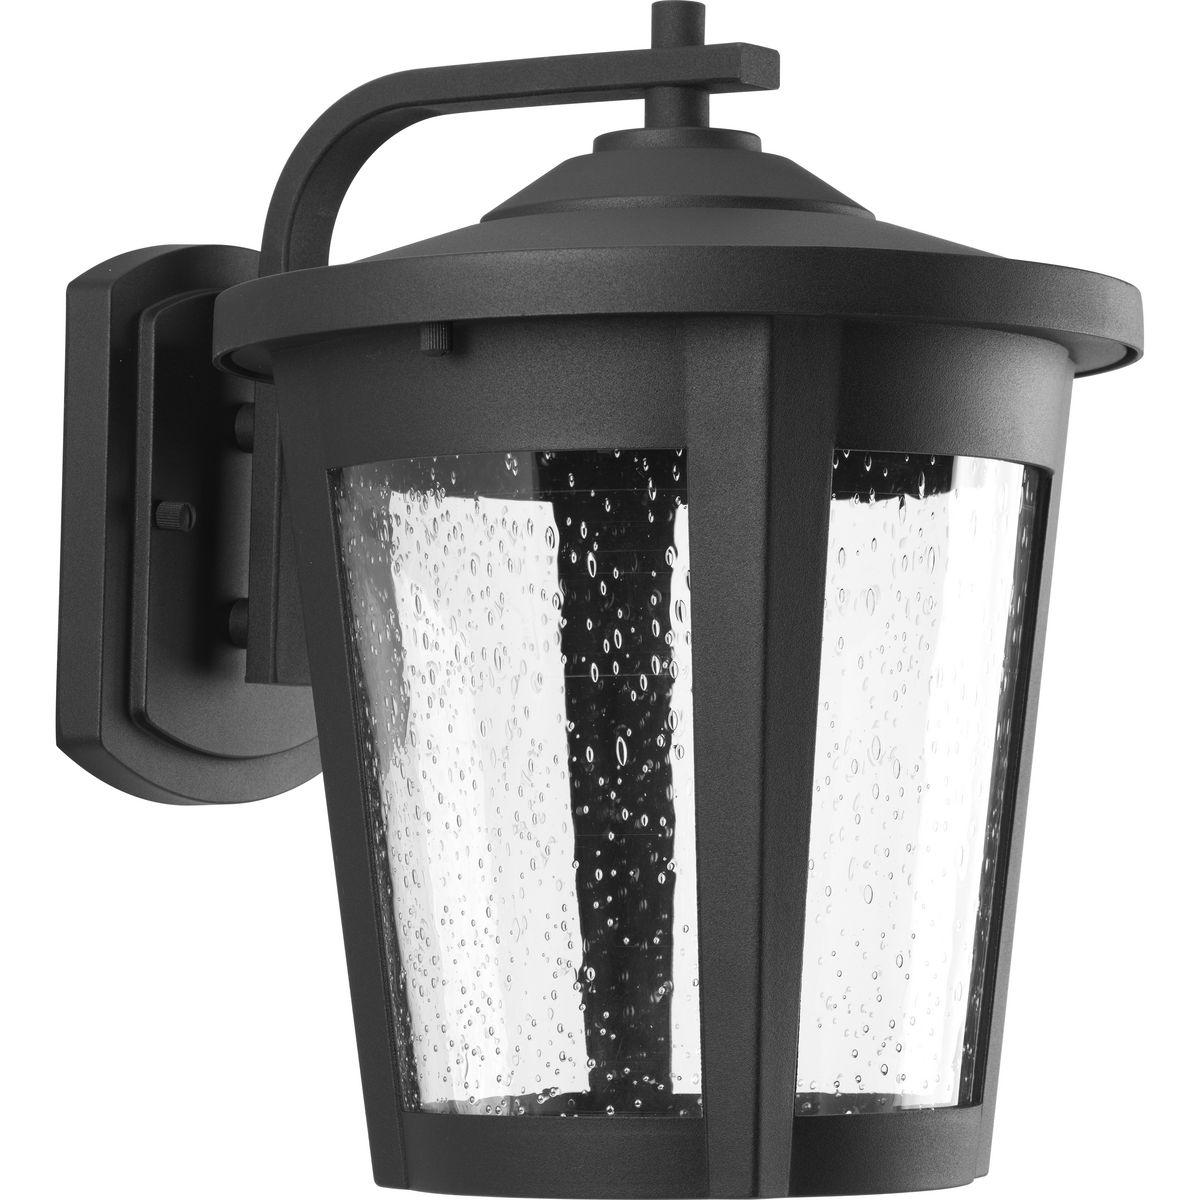 Hubbell P6079-3130K9 The East Haven LED Collection offers modern styling to complement a wide variety of home styles. The one-light large LED outdoor wall lantern has a Black frame that cradles a seeded glass shade. 120V AC replaceable LED module, 1,211 lumens 71.2 lumens/wat